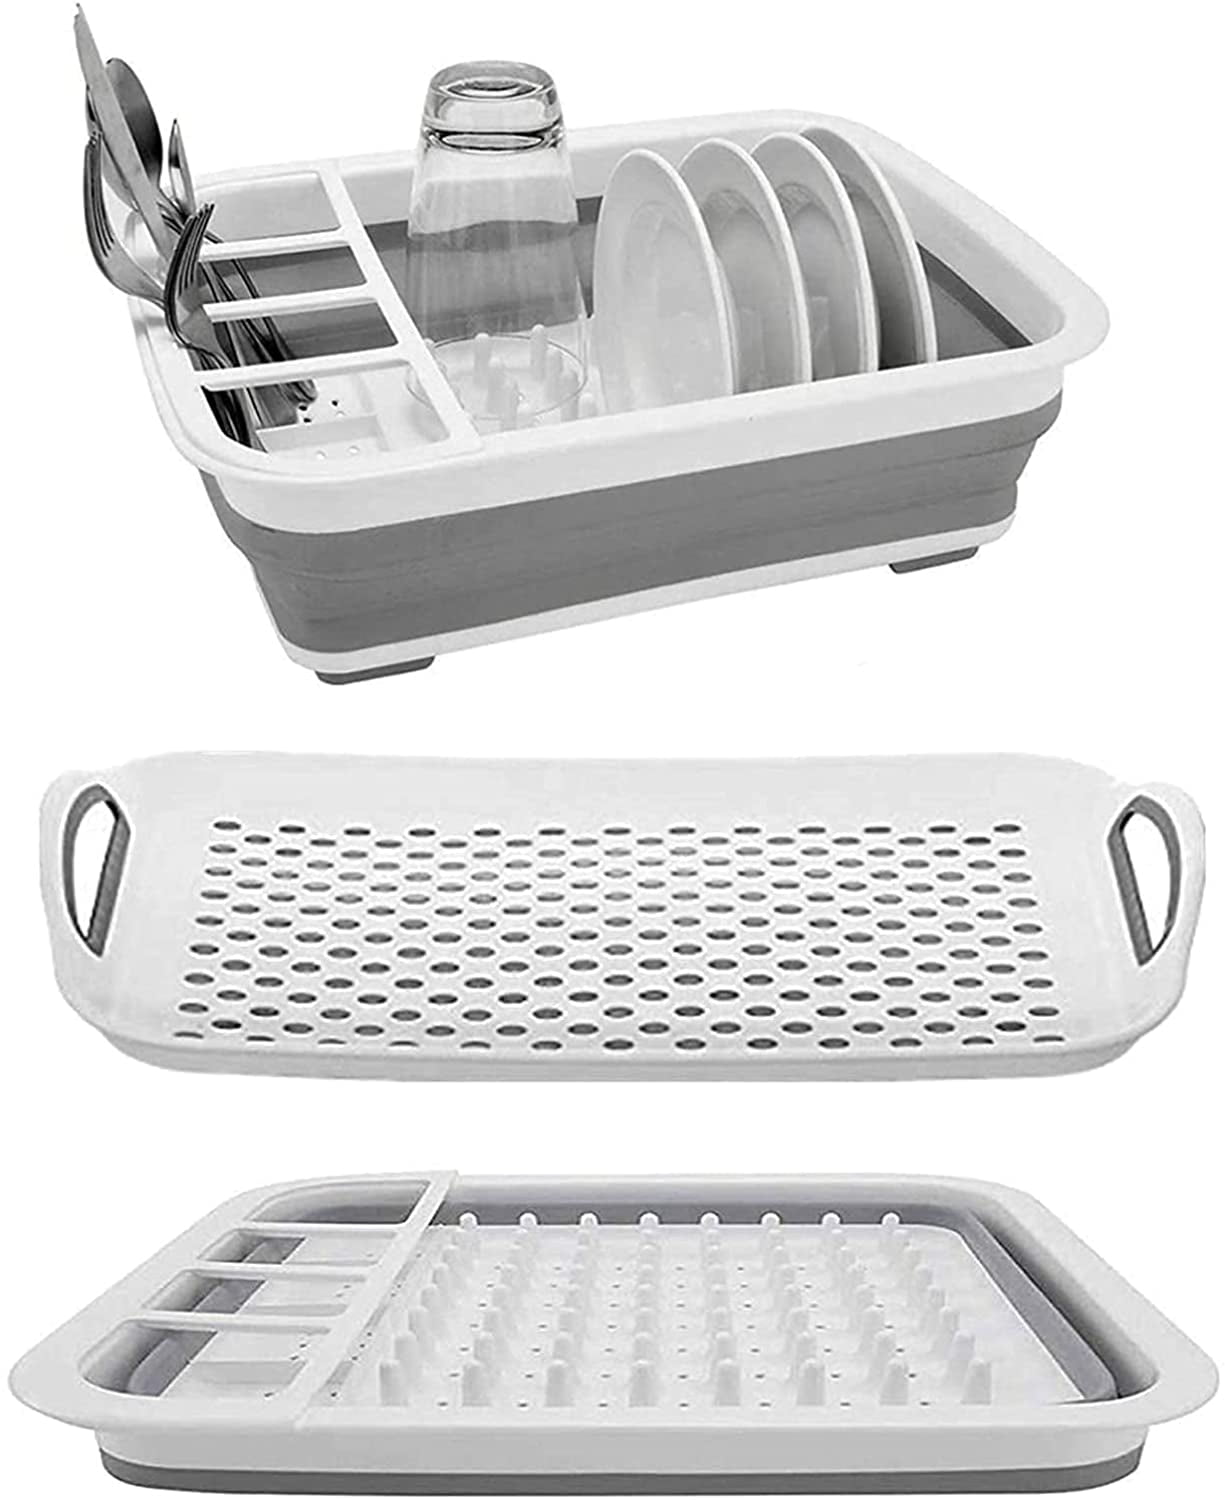 2-in-1 Dish Drying Mat With Rack Cutlery Drainer Addis Range